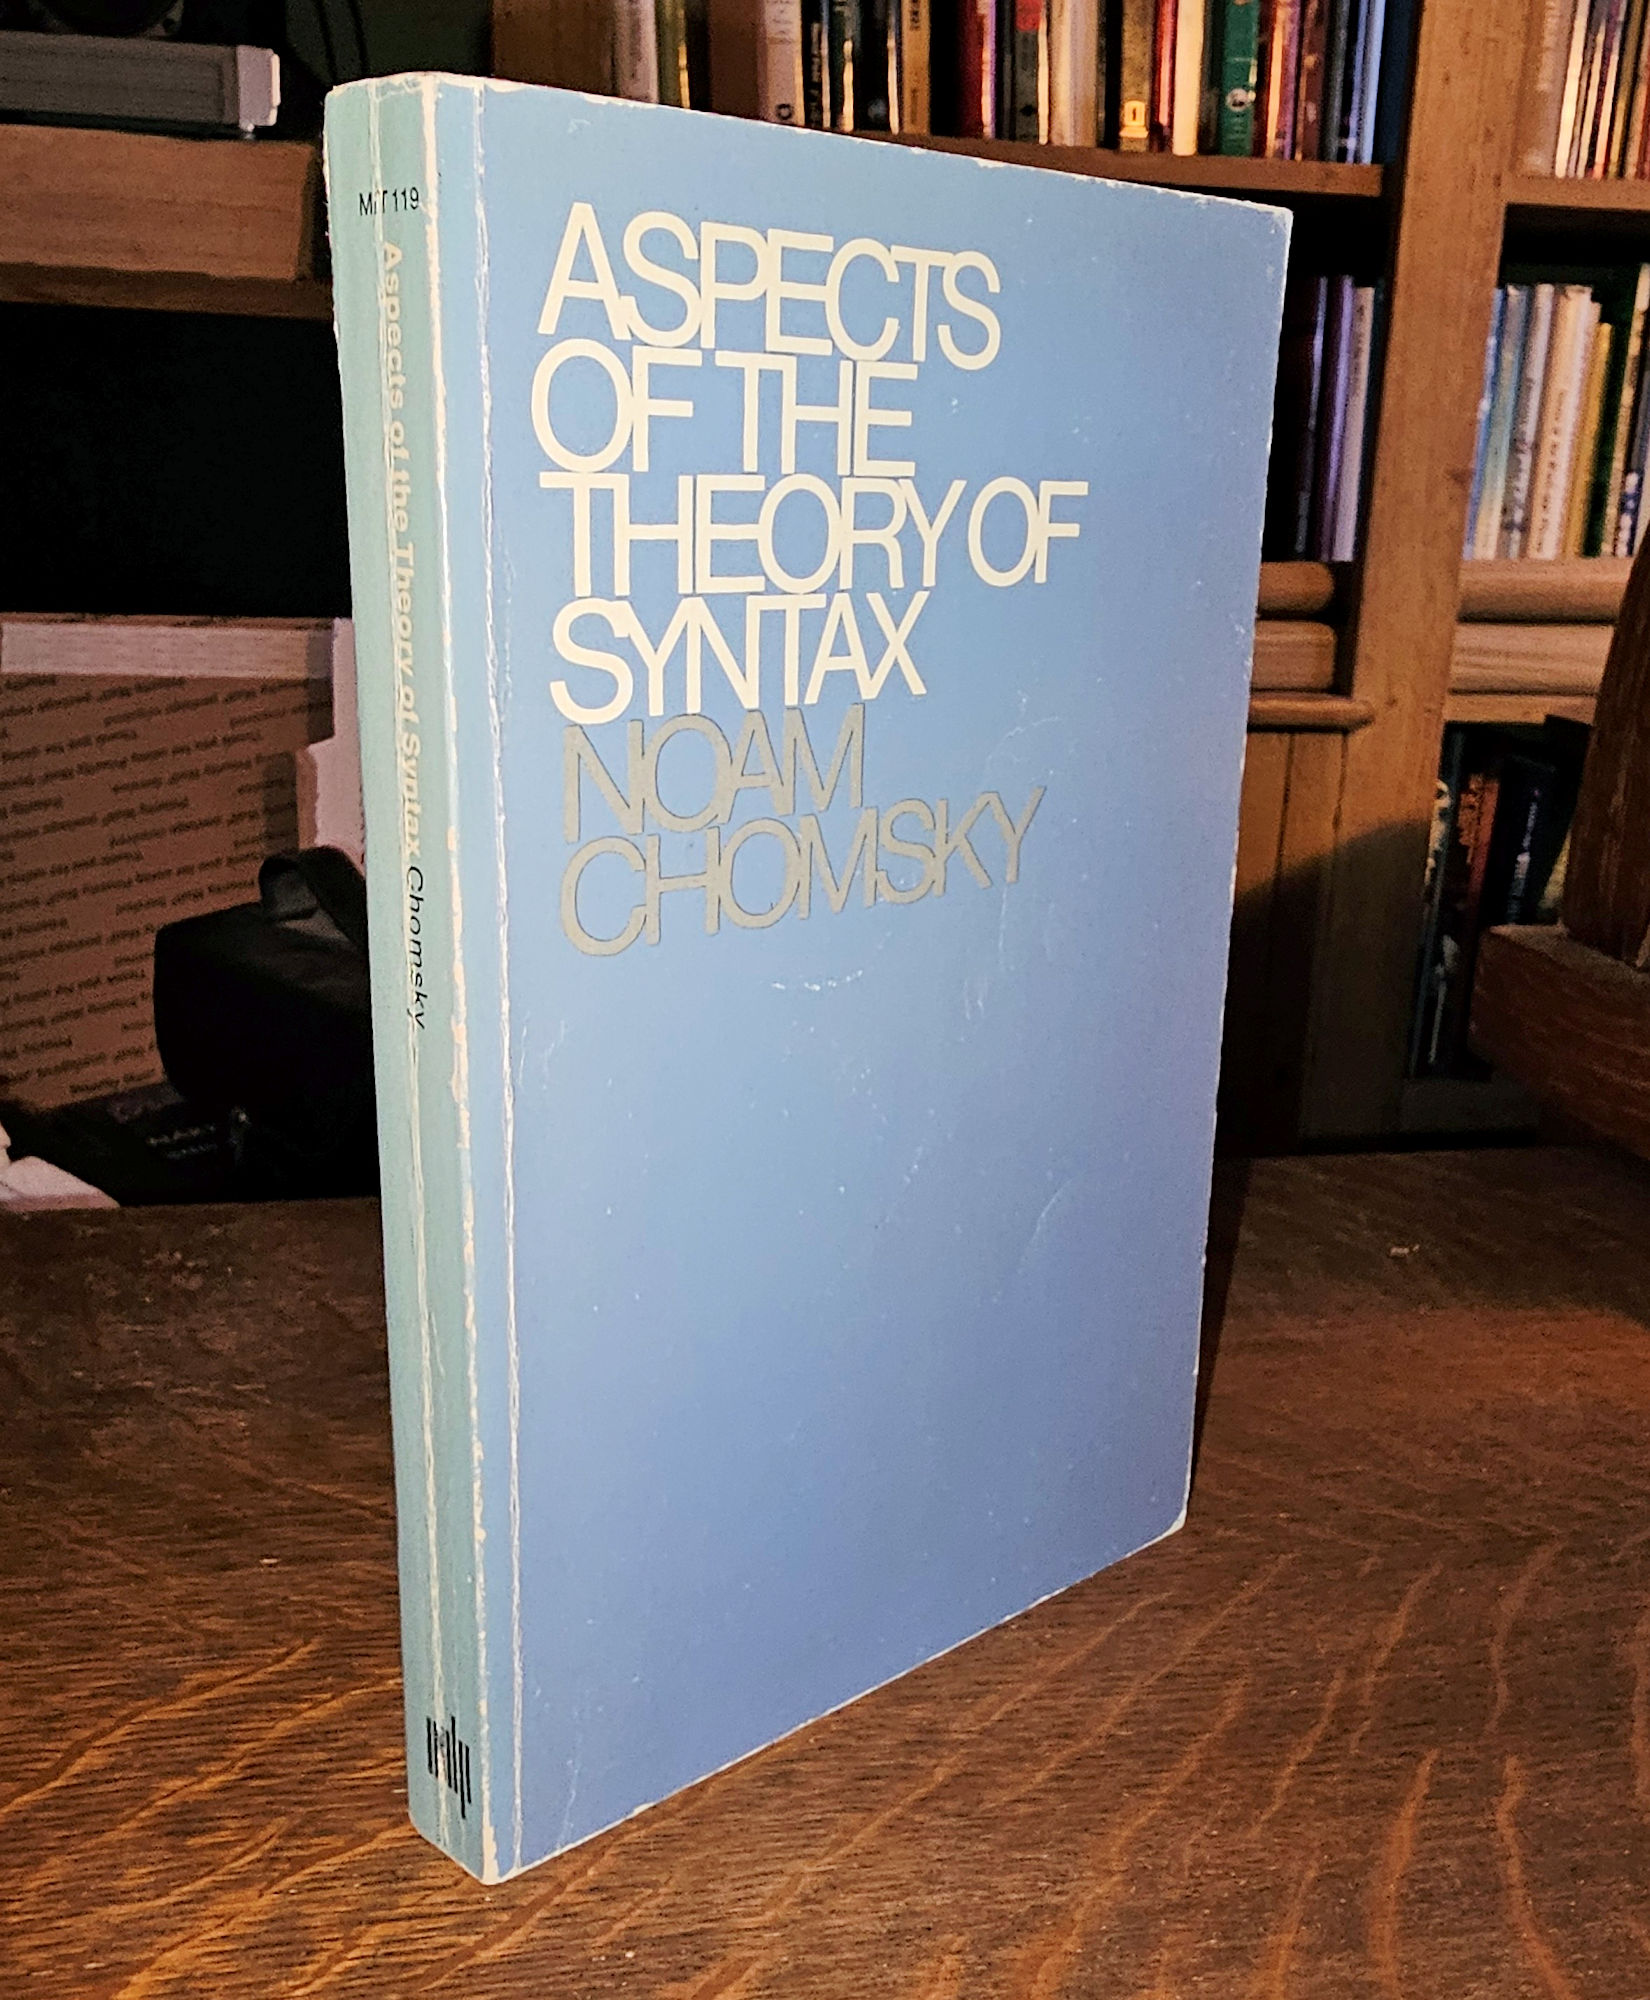 1970
                Aspects of the Theory of Syntax by Noam Chomsky